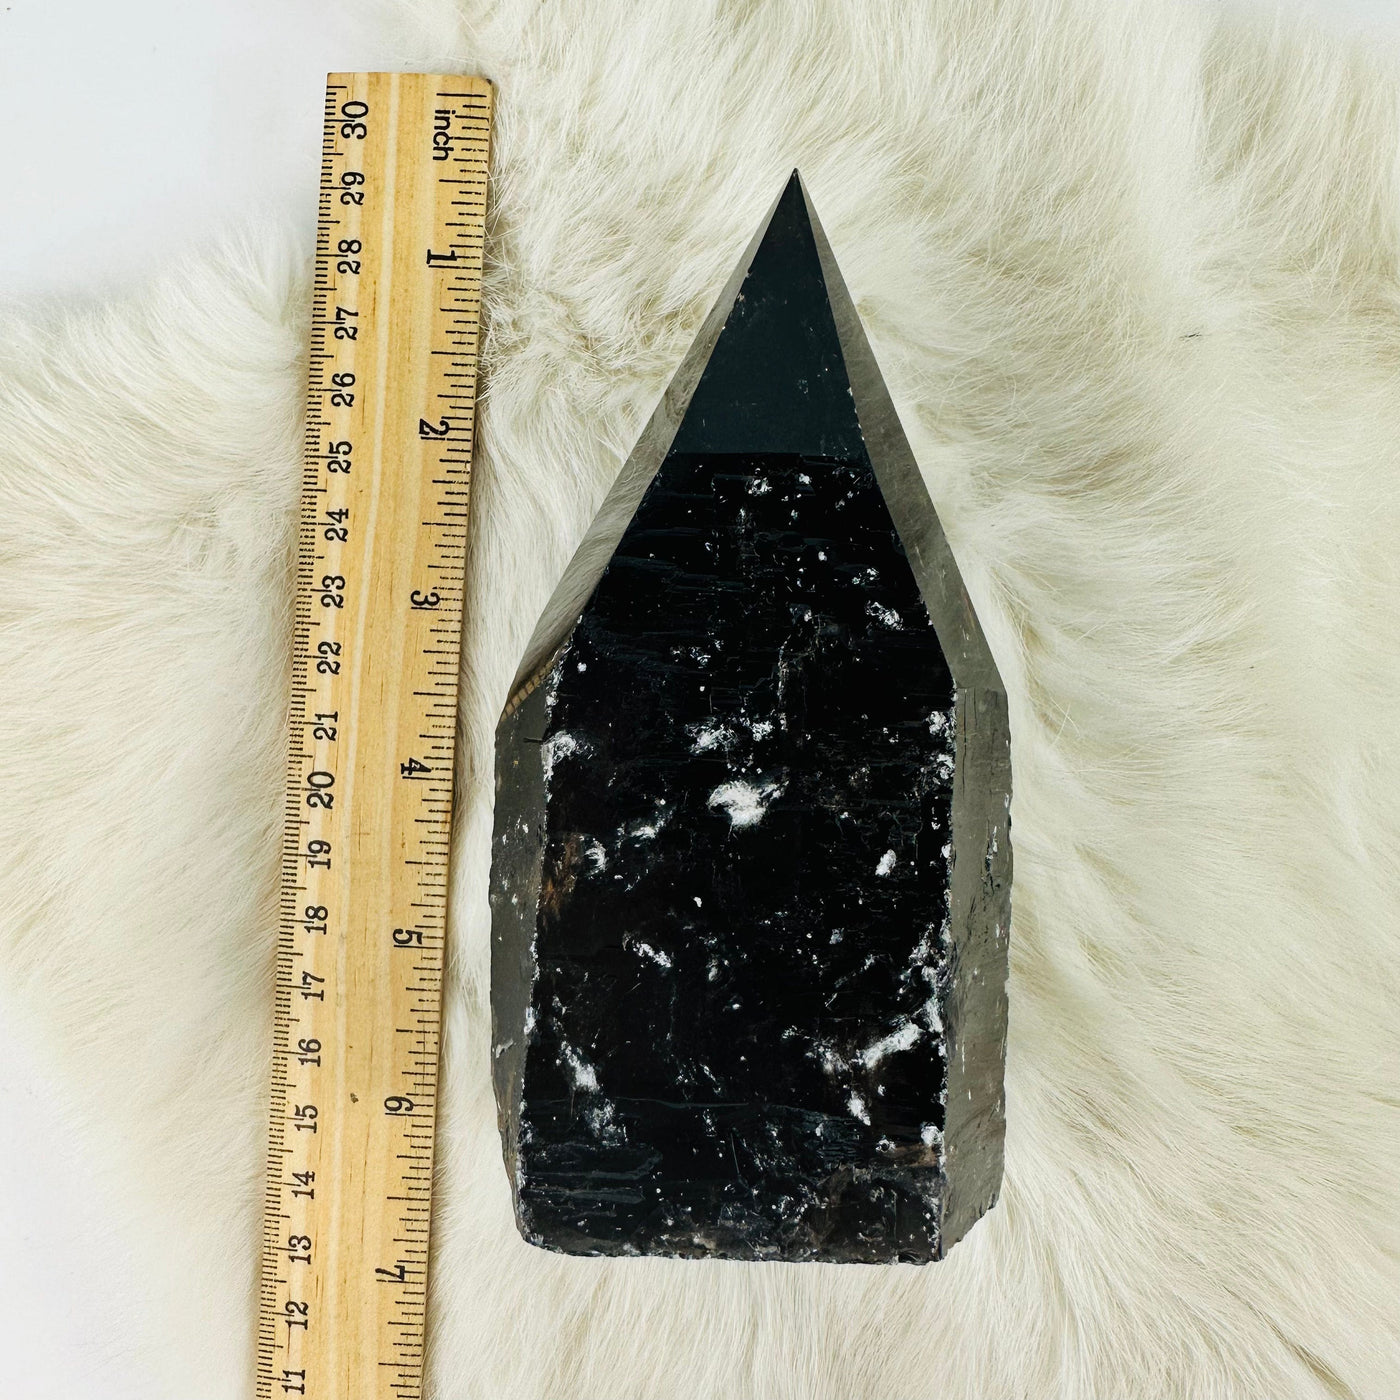 smokey quartz semi polished point next to a ruler for size reference